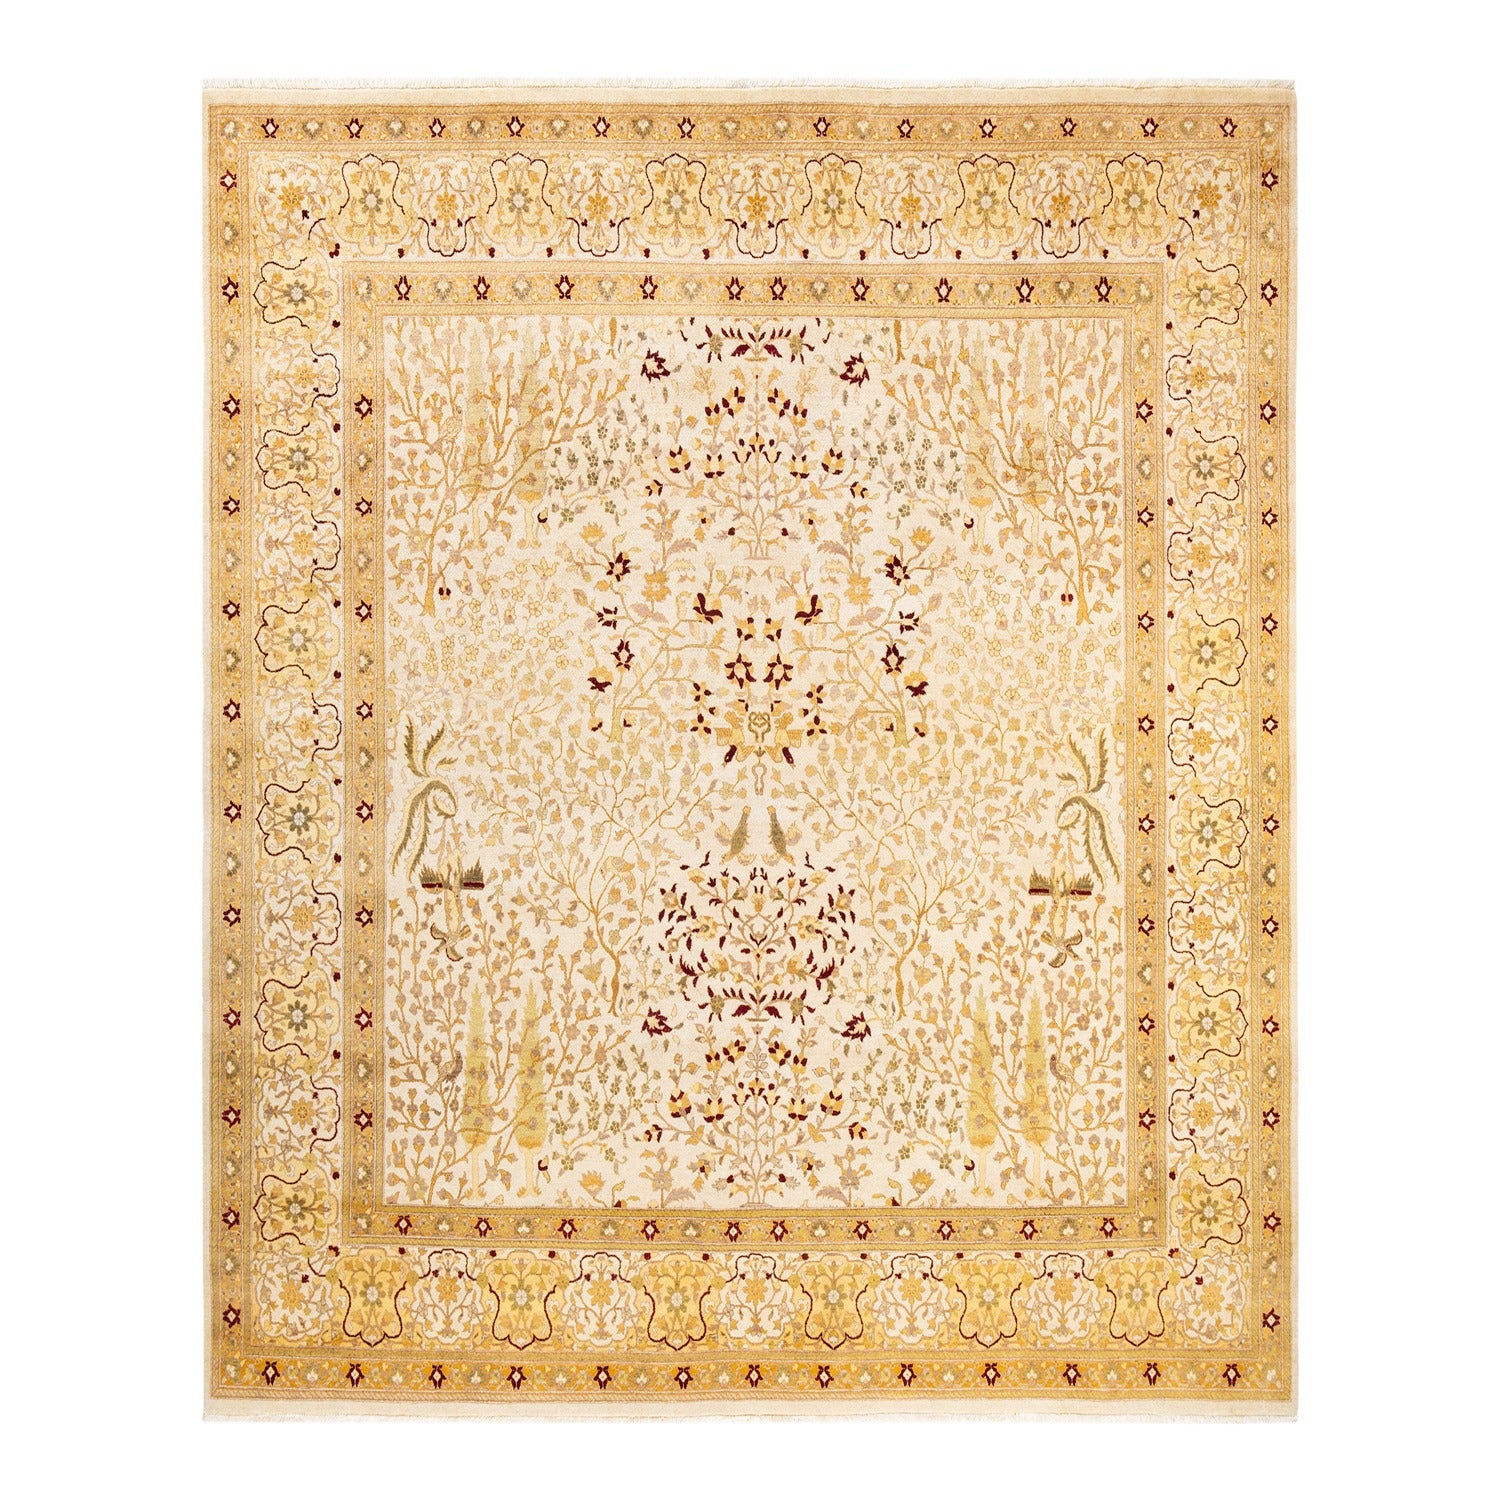 Exquisite hand-knotted rug with intricate botanical patterns in gold and brown.